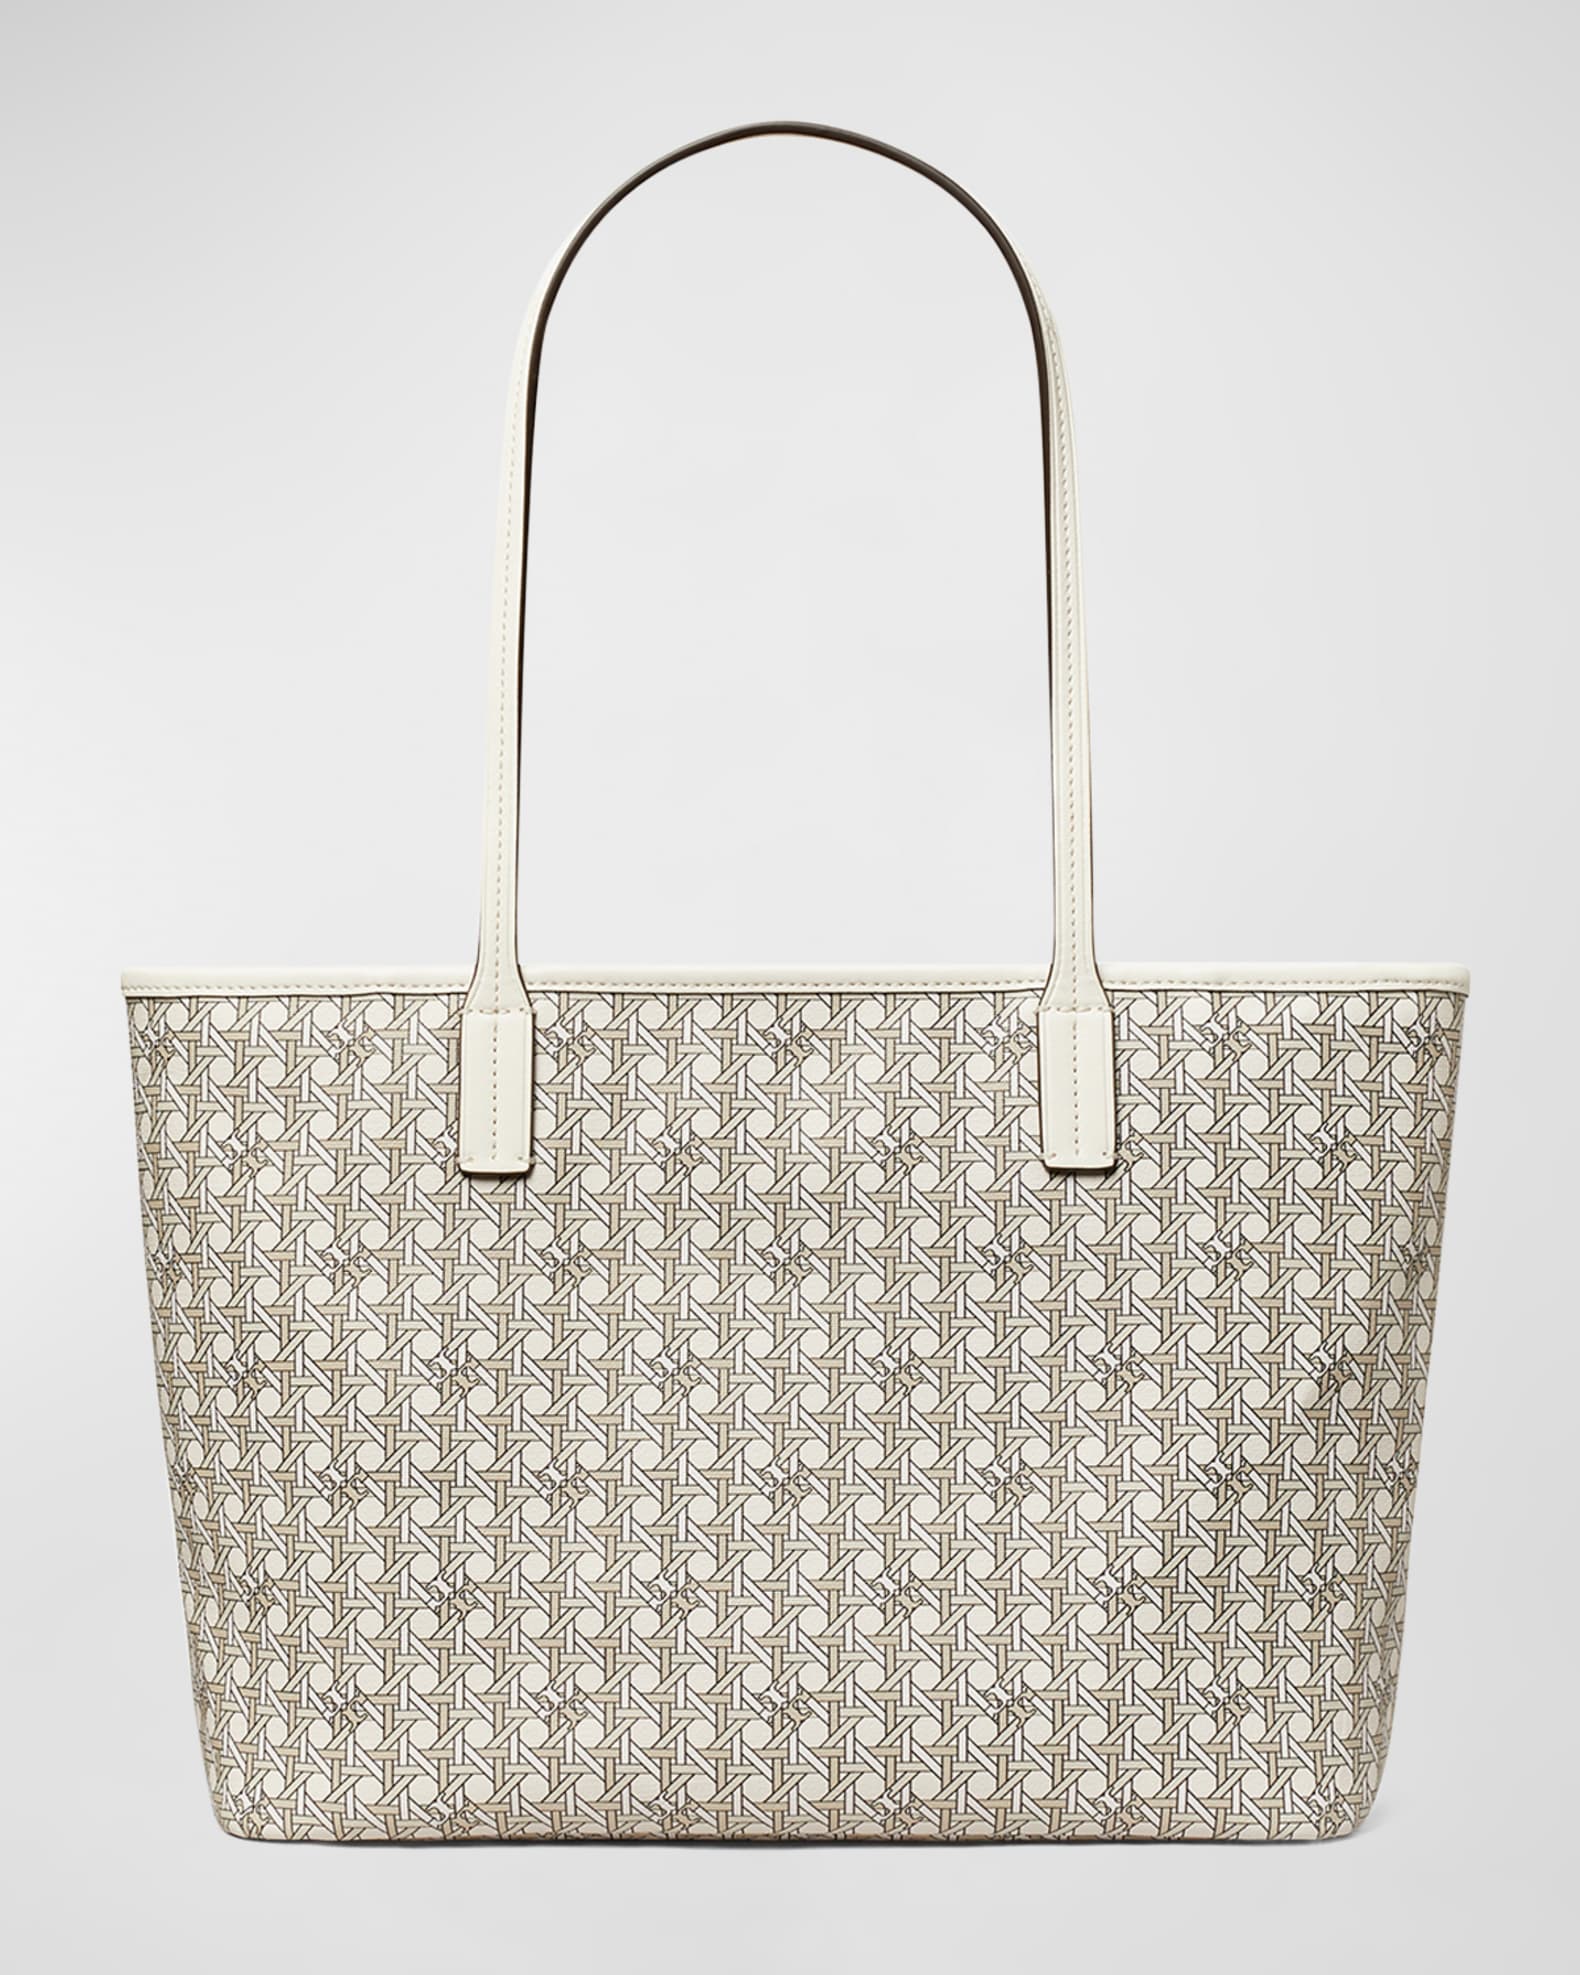 The 'Elle' Tote Bag: Timeless model, thin and light. 100% cotton